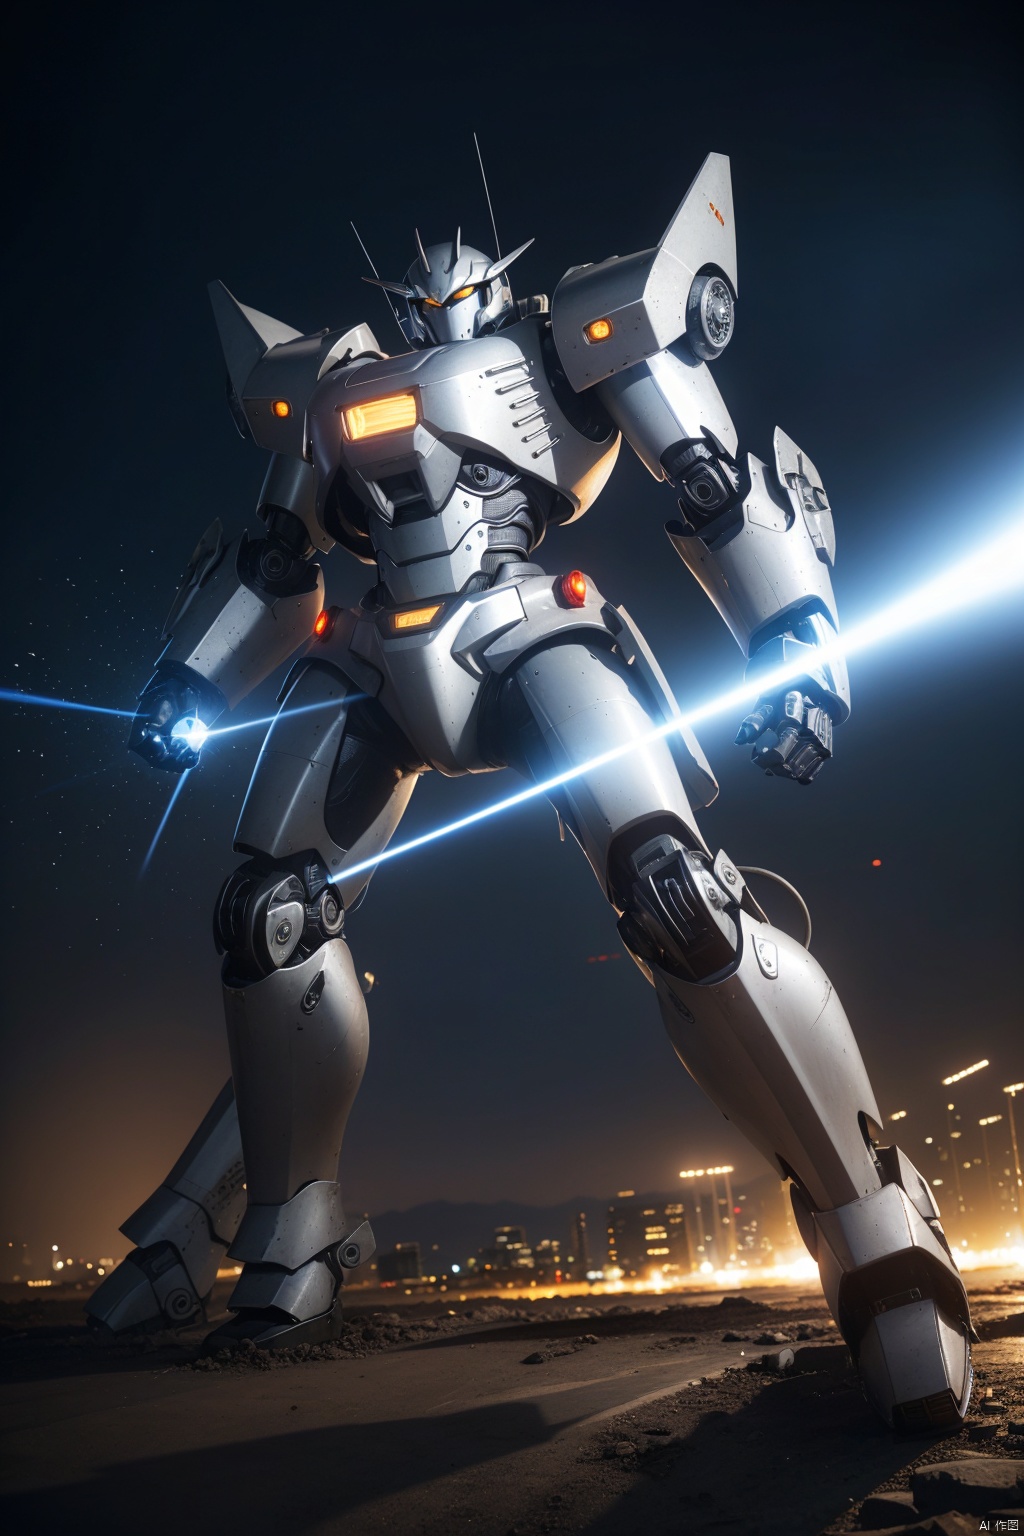 Masterpiece, high-quality, 8K, 1boy, streamlined design, high-strength metal armor, black and silver metal texture, complex patterns. Complex mechanical structure, blue energy light emitting from the chest, glowing special effects, complex arms, high-energy laser emitter on the arms,








, shanhaijing,mecha, mecha_robot, wasteland, lolsplashart, 1Man